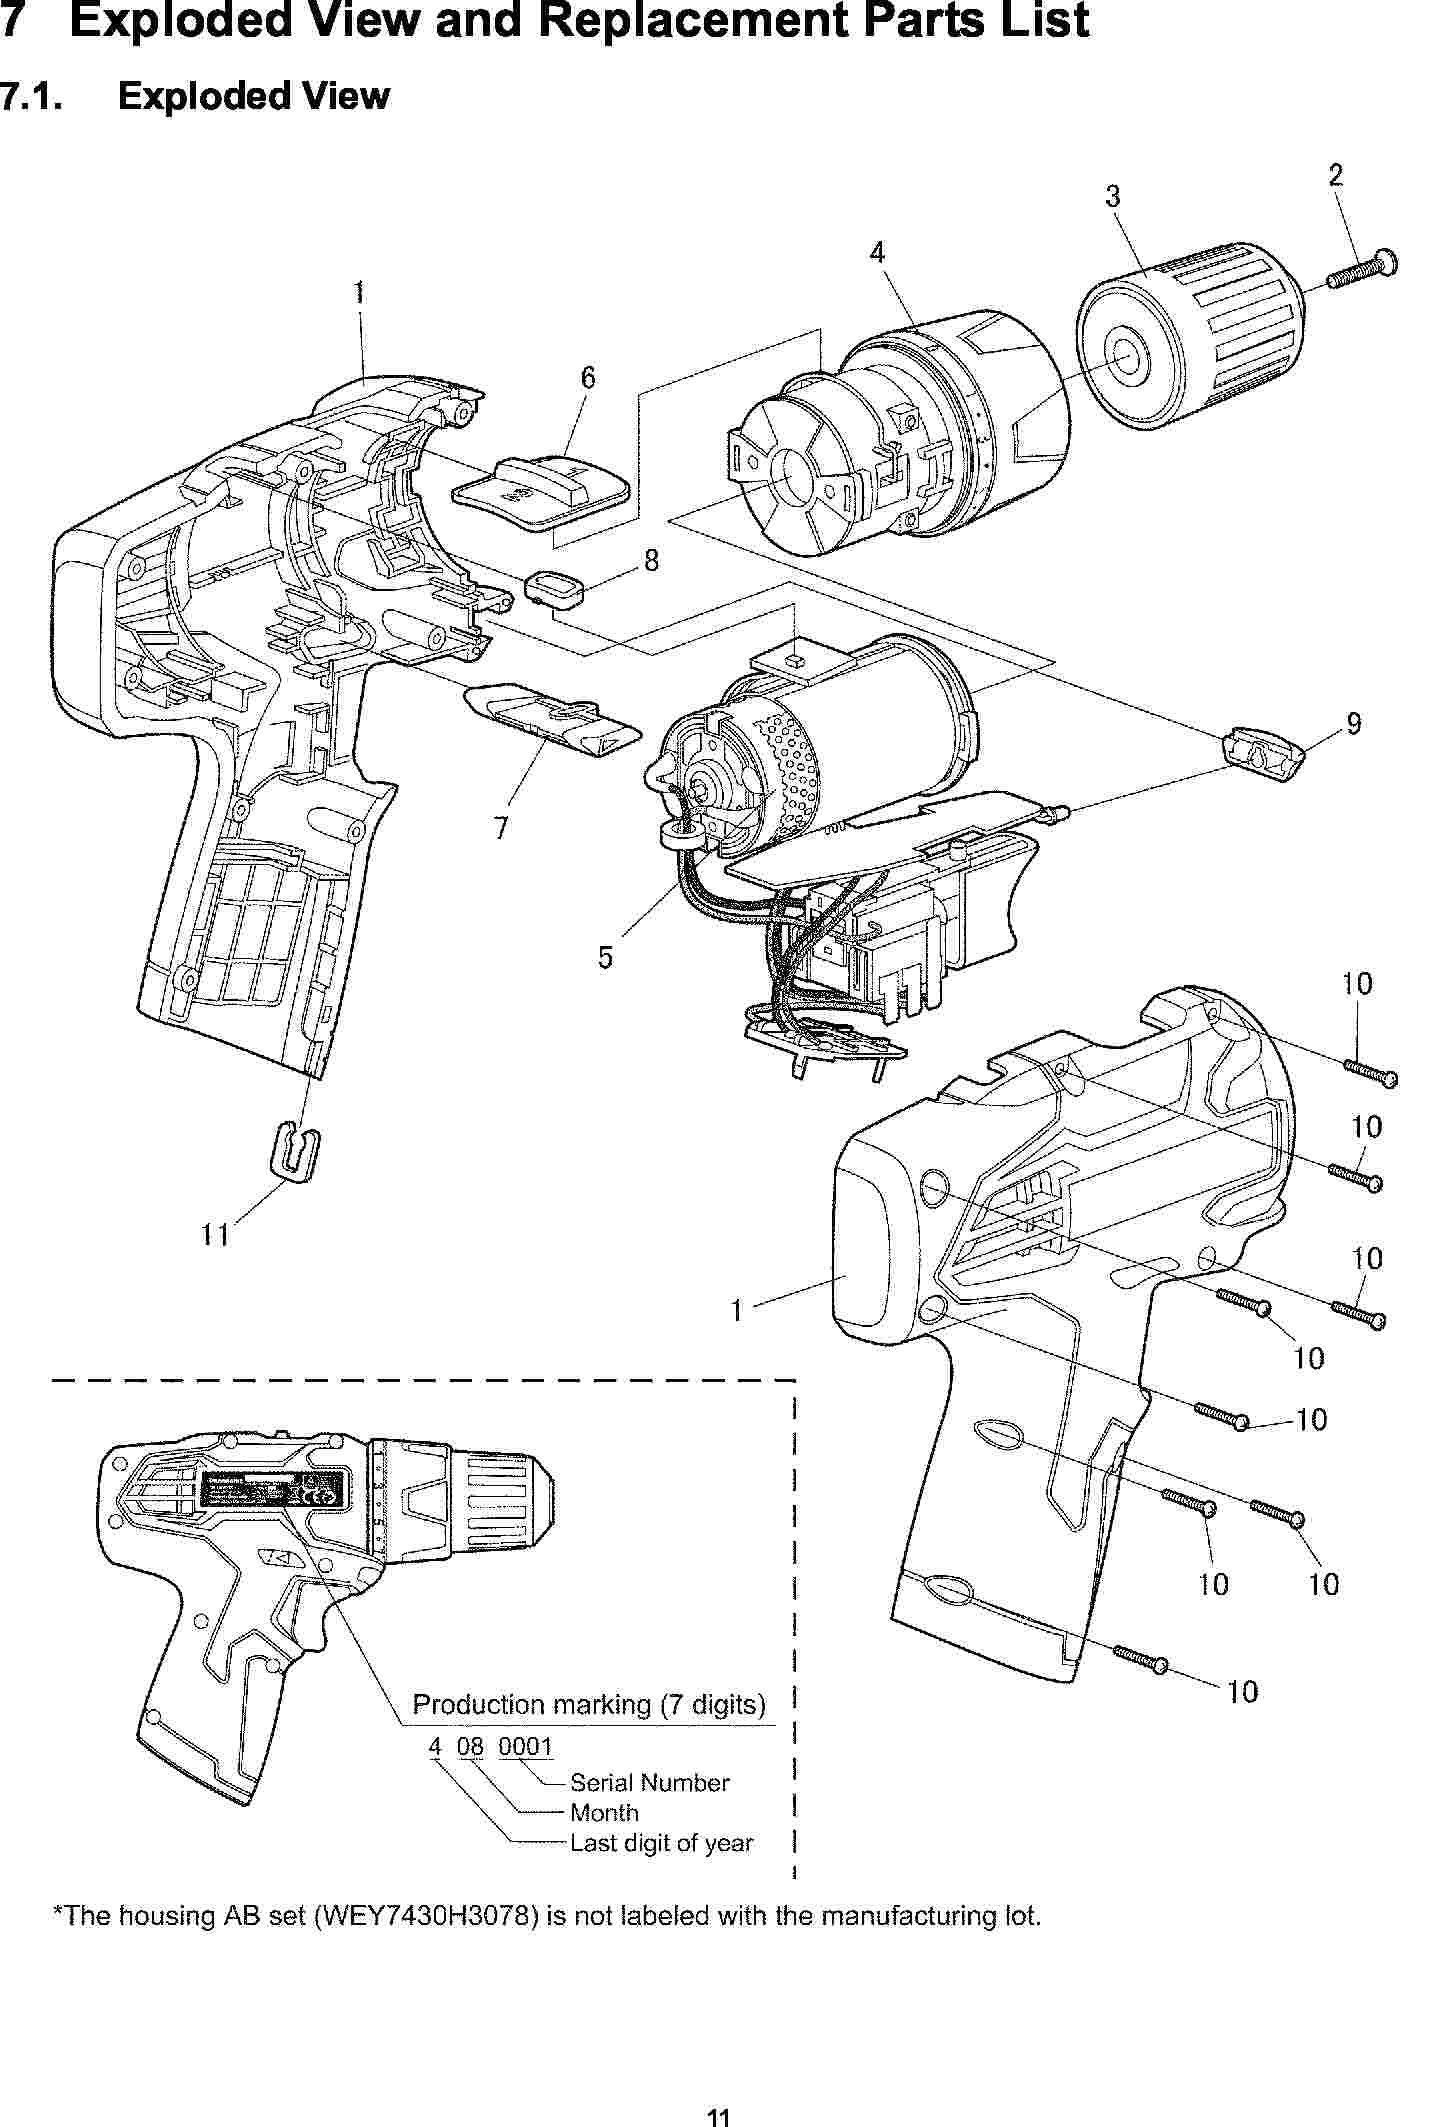 EY7430: Exploded View